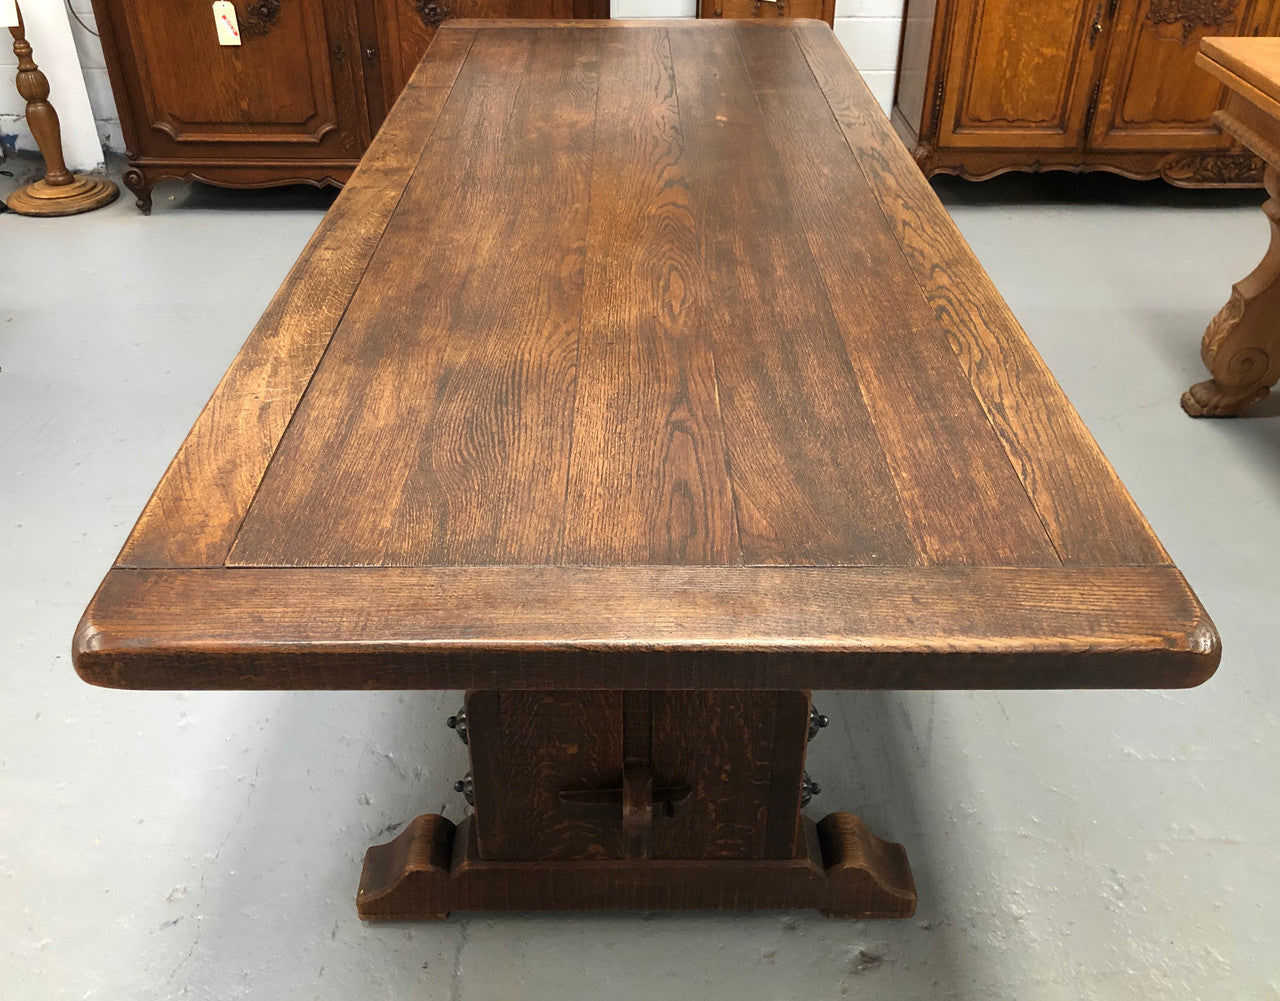 French Oak stretcher base Farmhouse dining table. In good original detailed condition.